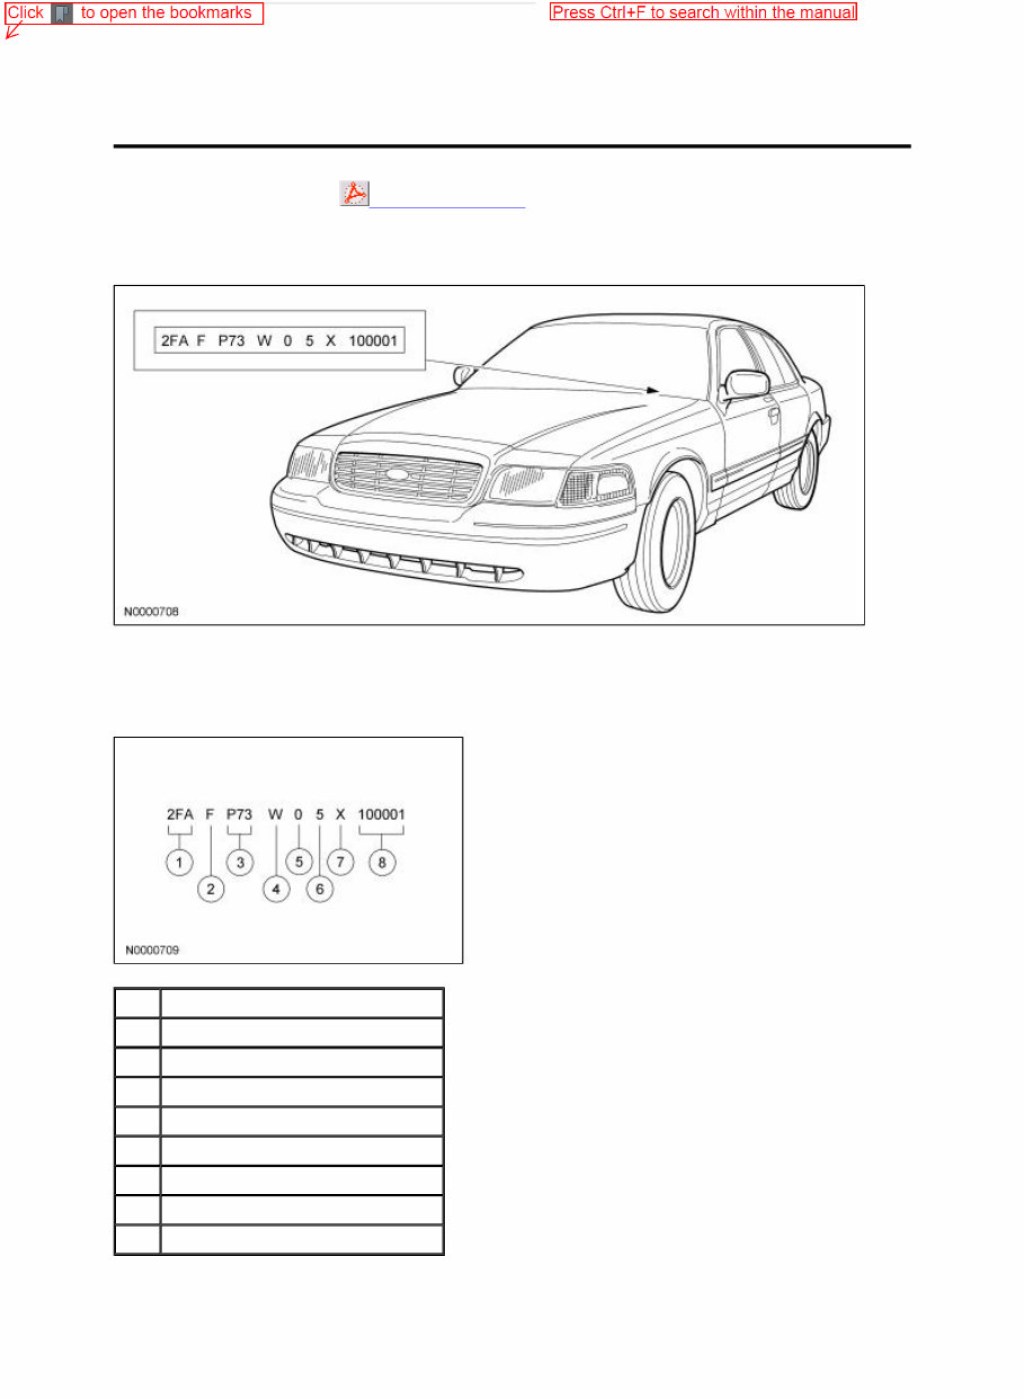 Picture of: FORD CROWN VICTORIA Workshop Service Repair Manual